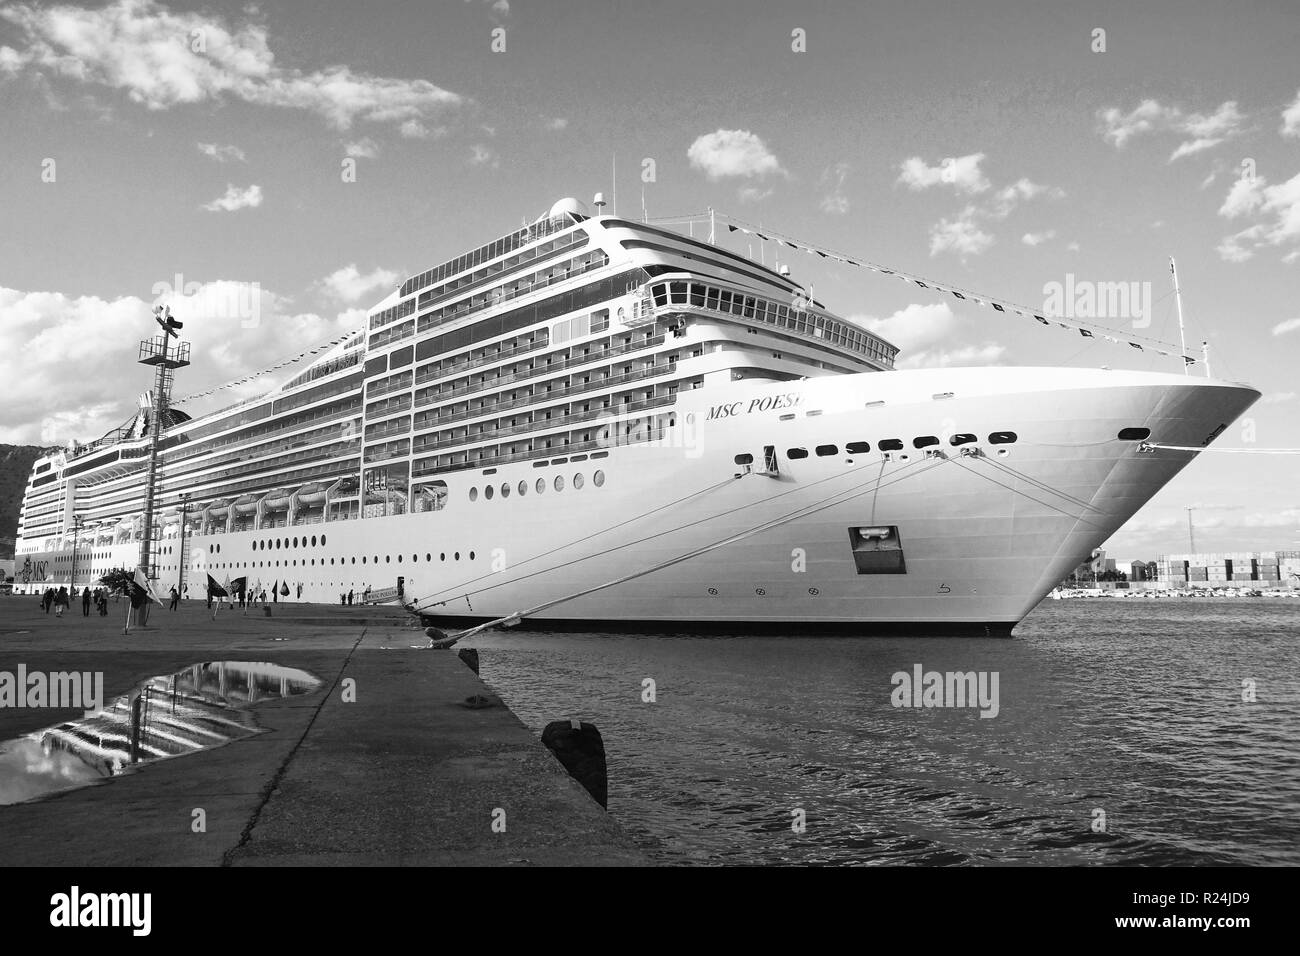 Antalia, Turkey-April 6, 2008: Cruise ship in the port. MSC Poesia cruise ship doched at port of Antalia. Stock Photo